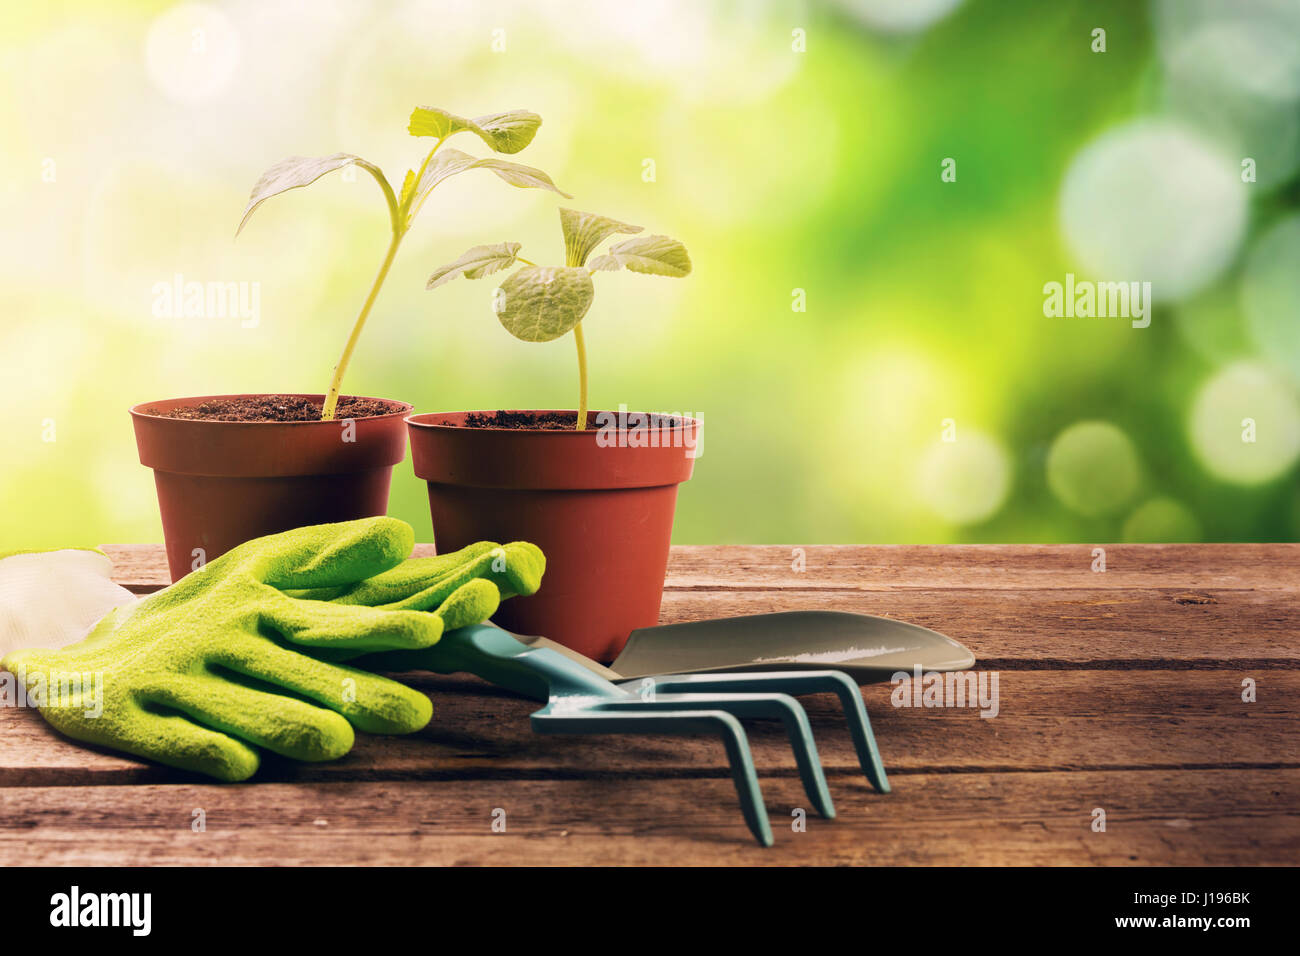 gardening tools and plants on old wooden table in garden Stock Photo